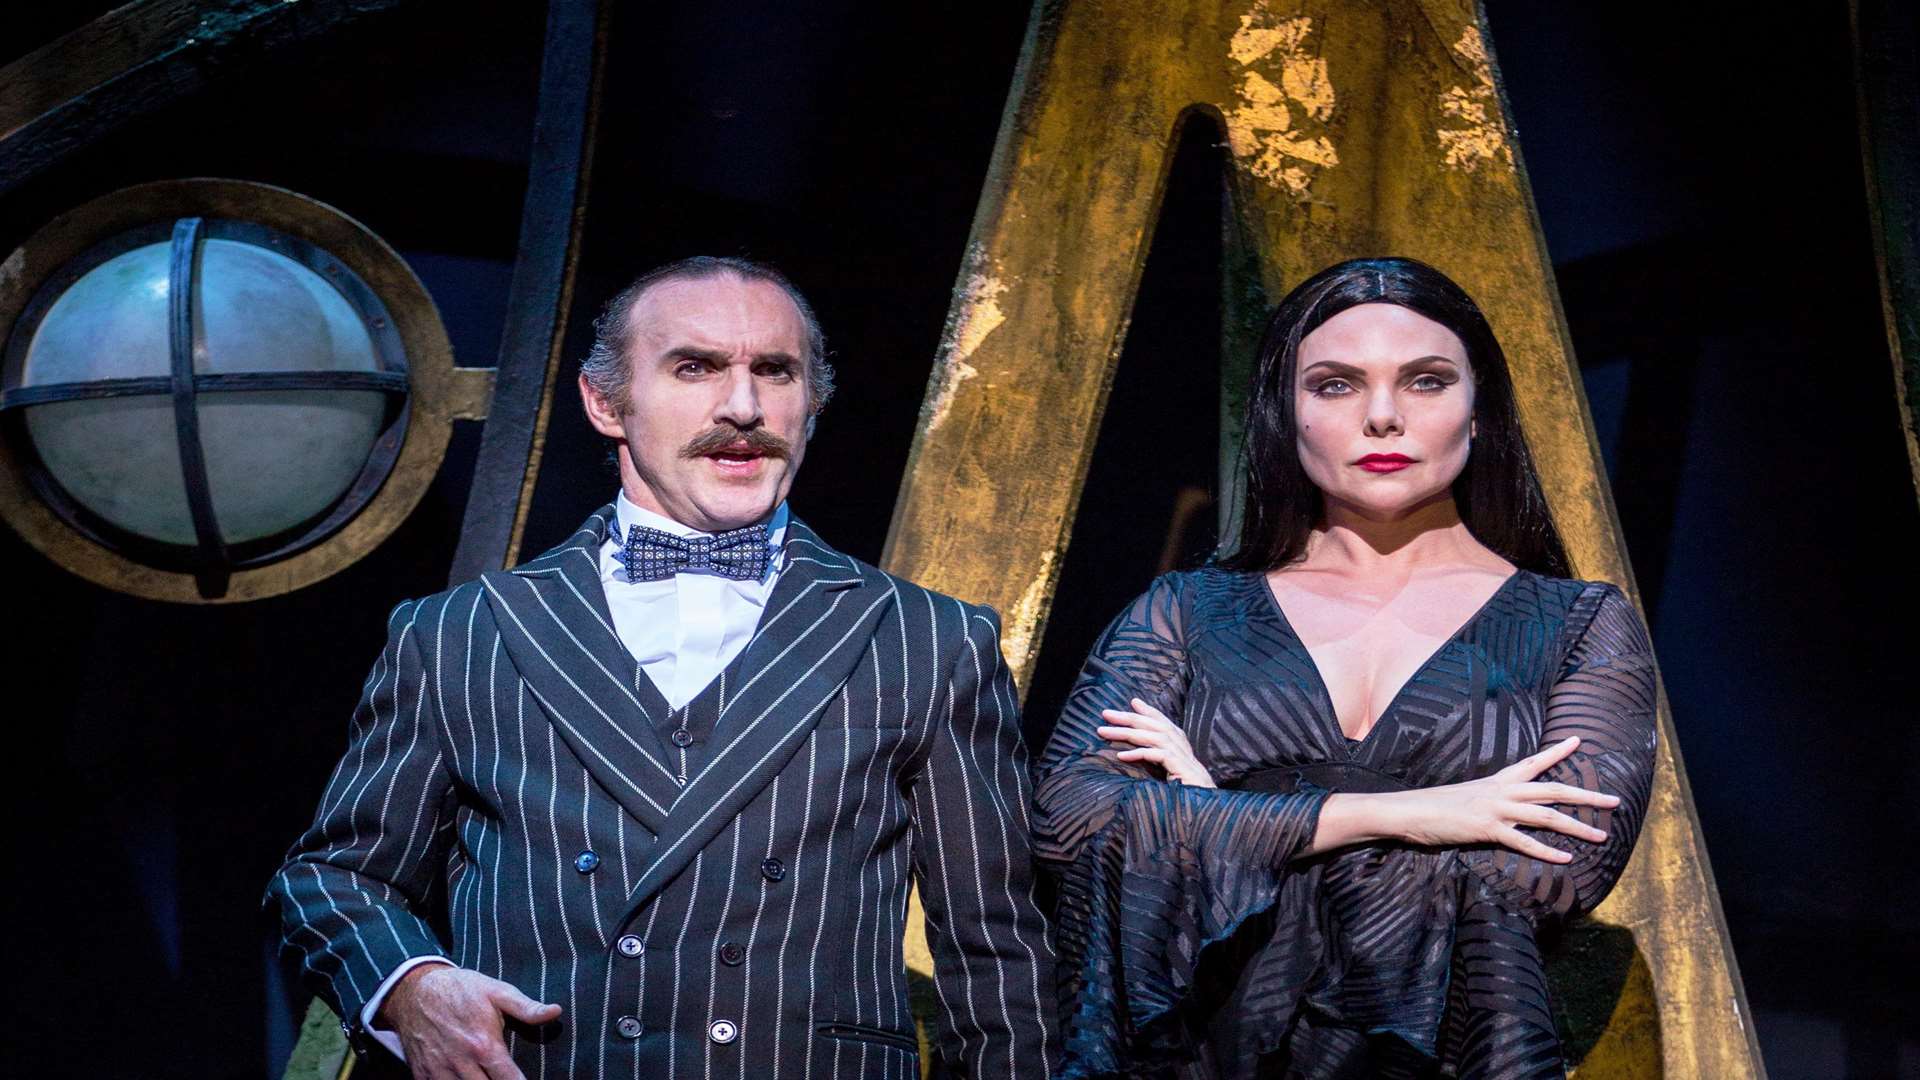 Cameron Blakeley as Gomez and Samantha Womack as Morticia in The Addams Family